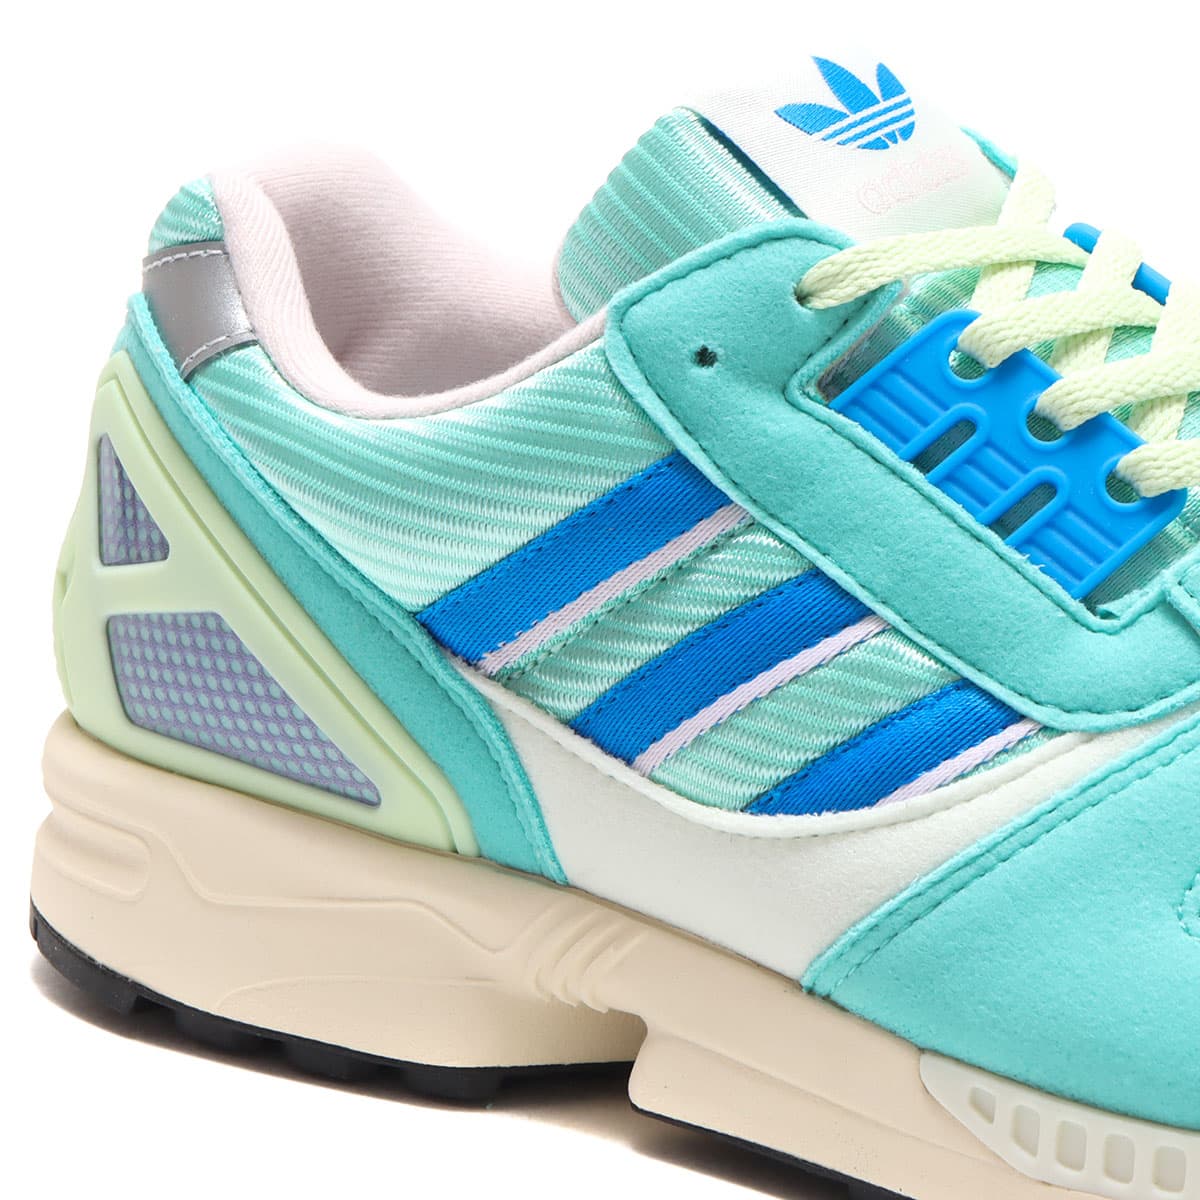 adidas ZX 8000 ALMOST LIME/ECLU TINT/BLUE RUSH 22SS-I